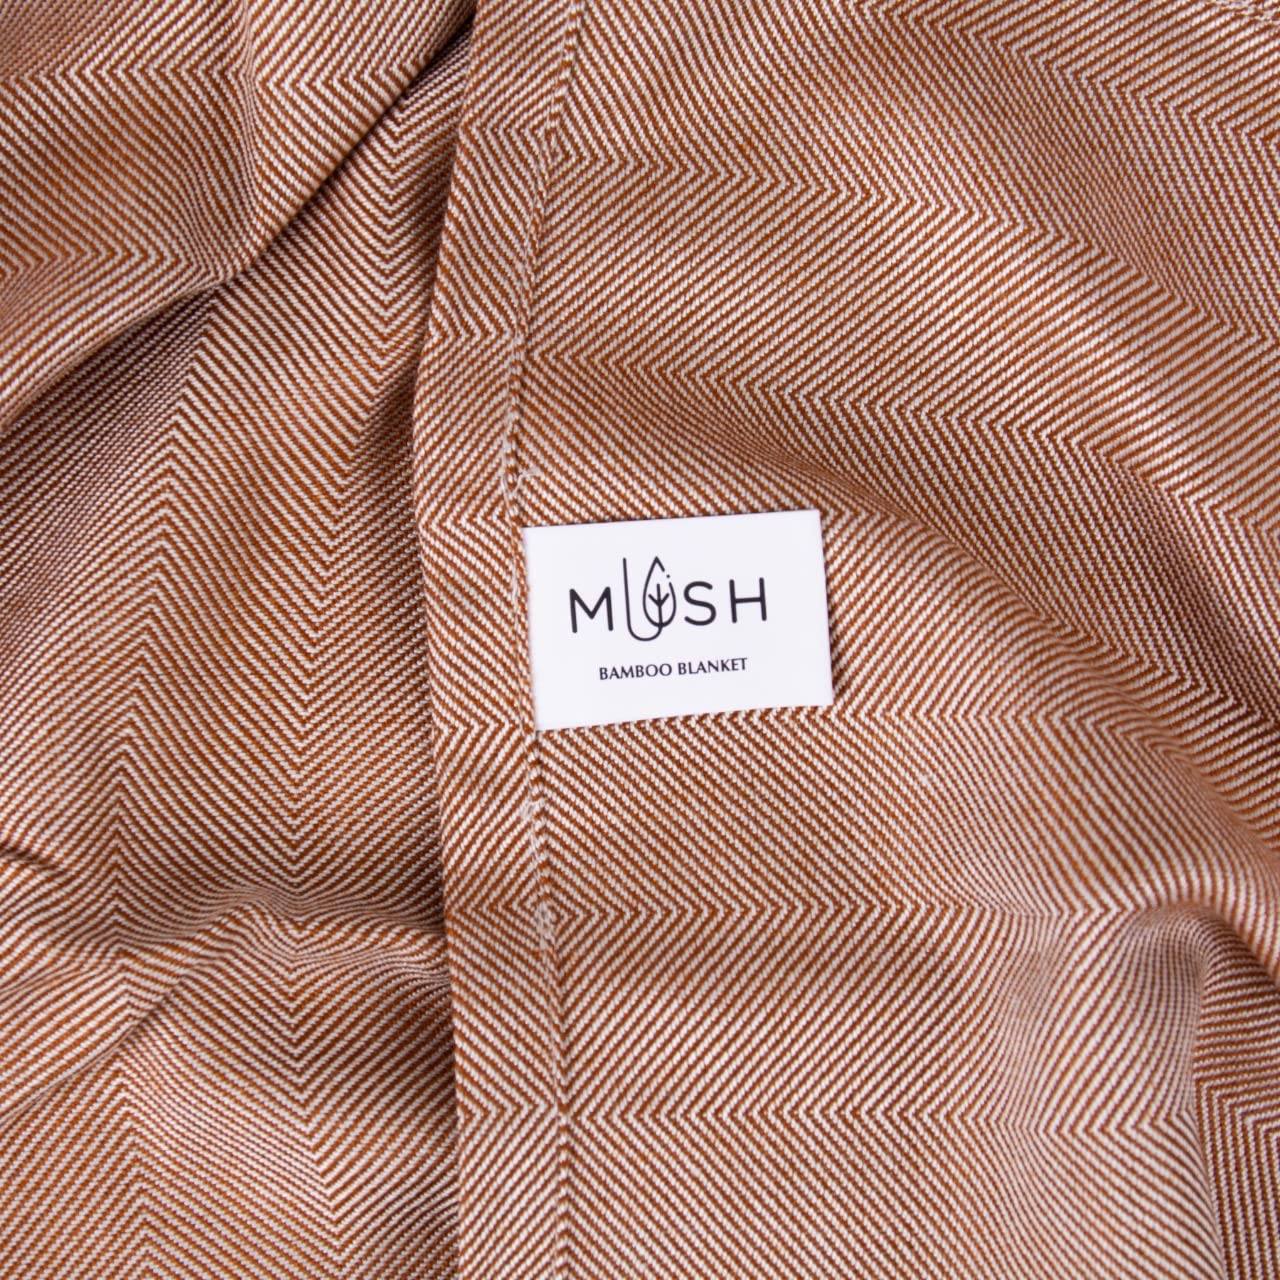 Mush Ultra-Soft, Light Weight & Thermoregulating, All Season 100% Bamboo Blanket & Dohar (Brown, Large - 5 x 7.5 ft)